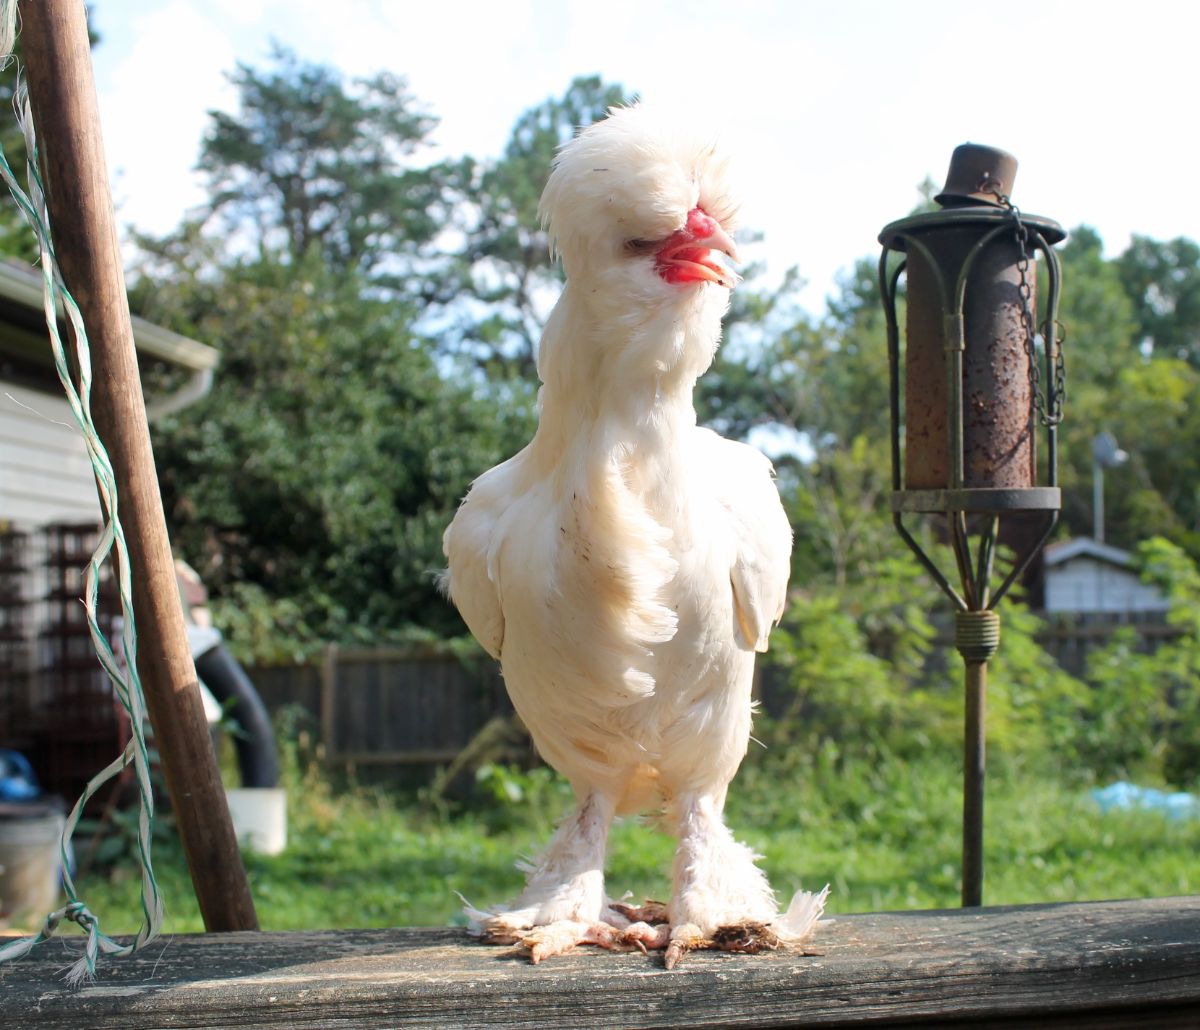 An adorable white Sultan Chicken perched on a wooden board.